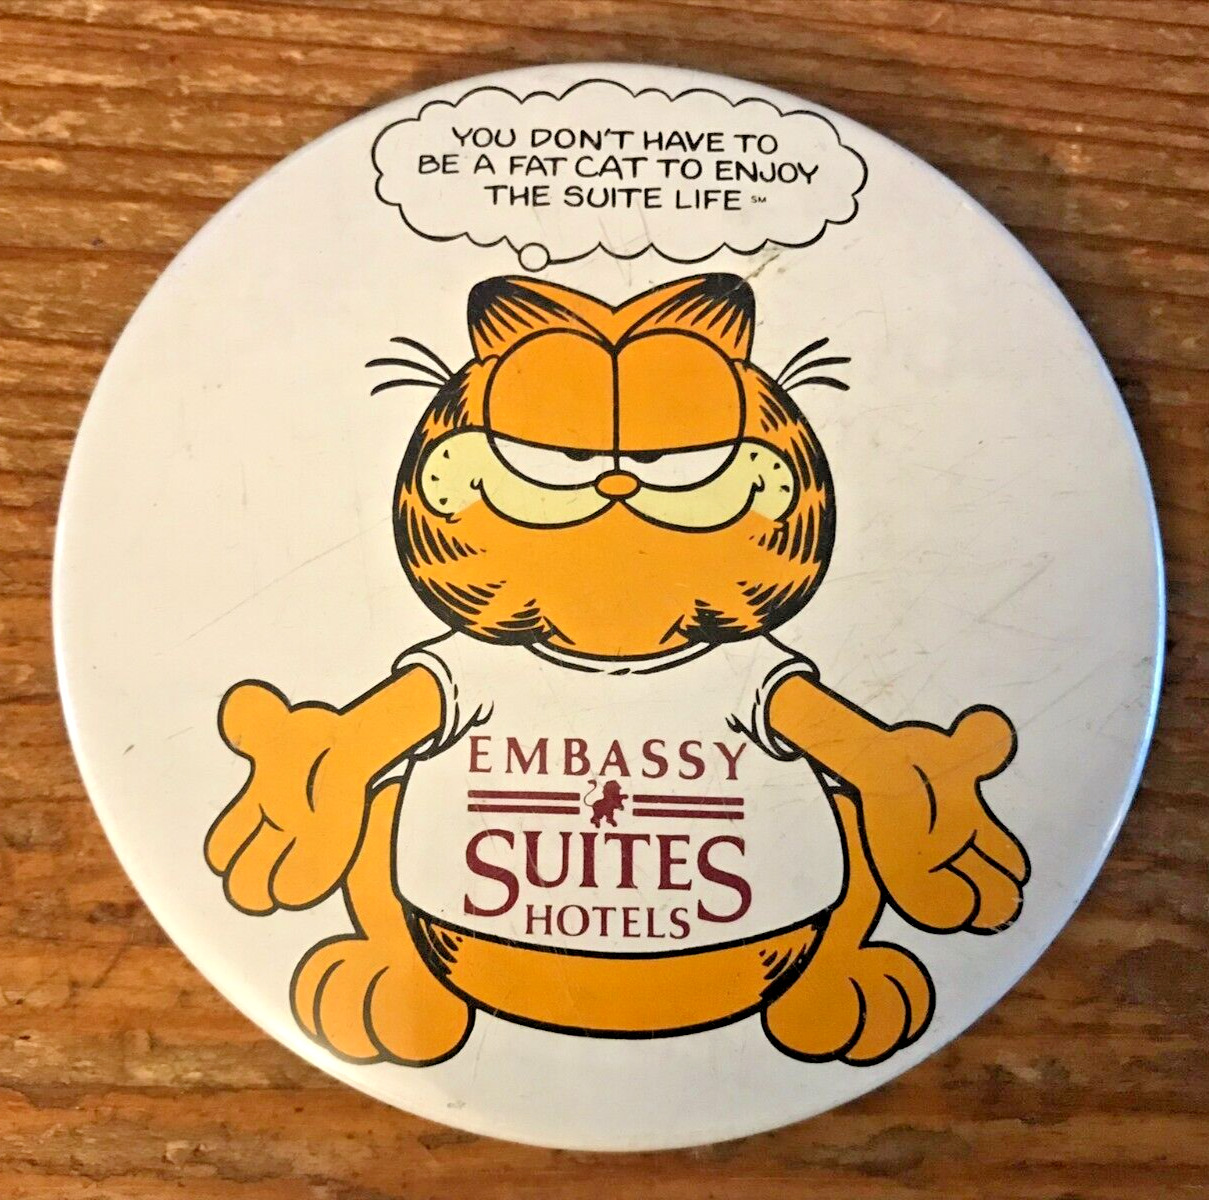 Vintage Garfield Pin Embassy Suites Hotels Advertising Button Pinback Fat Cat